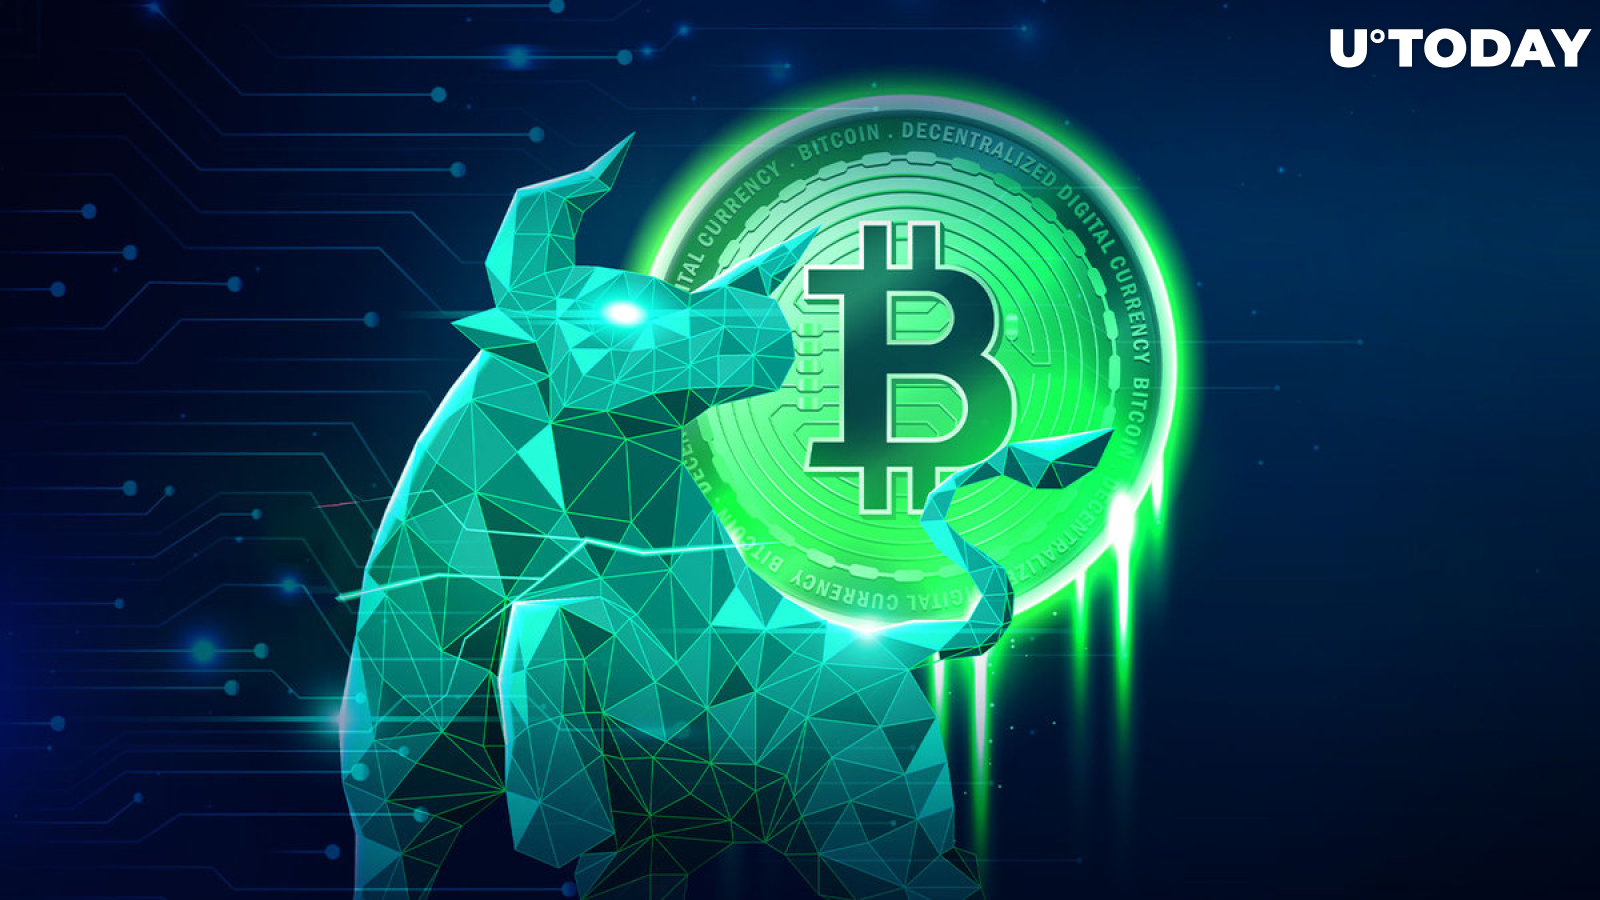 Bitcoin (BTC) Bull Run Is Just Getting Started, Says Analyst